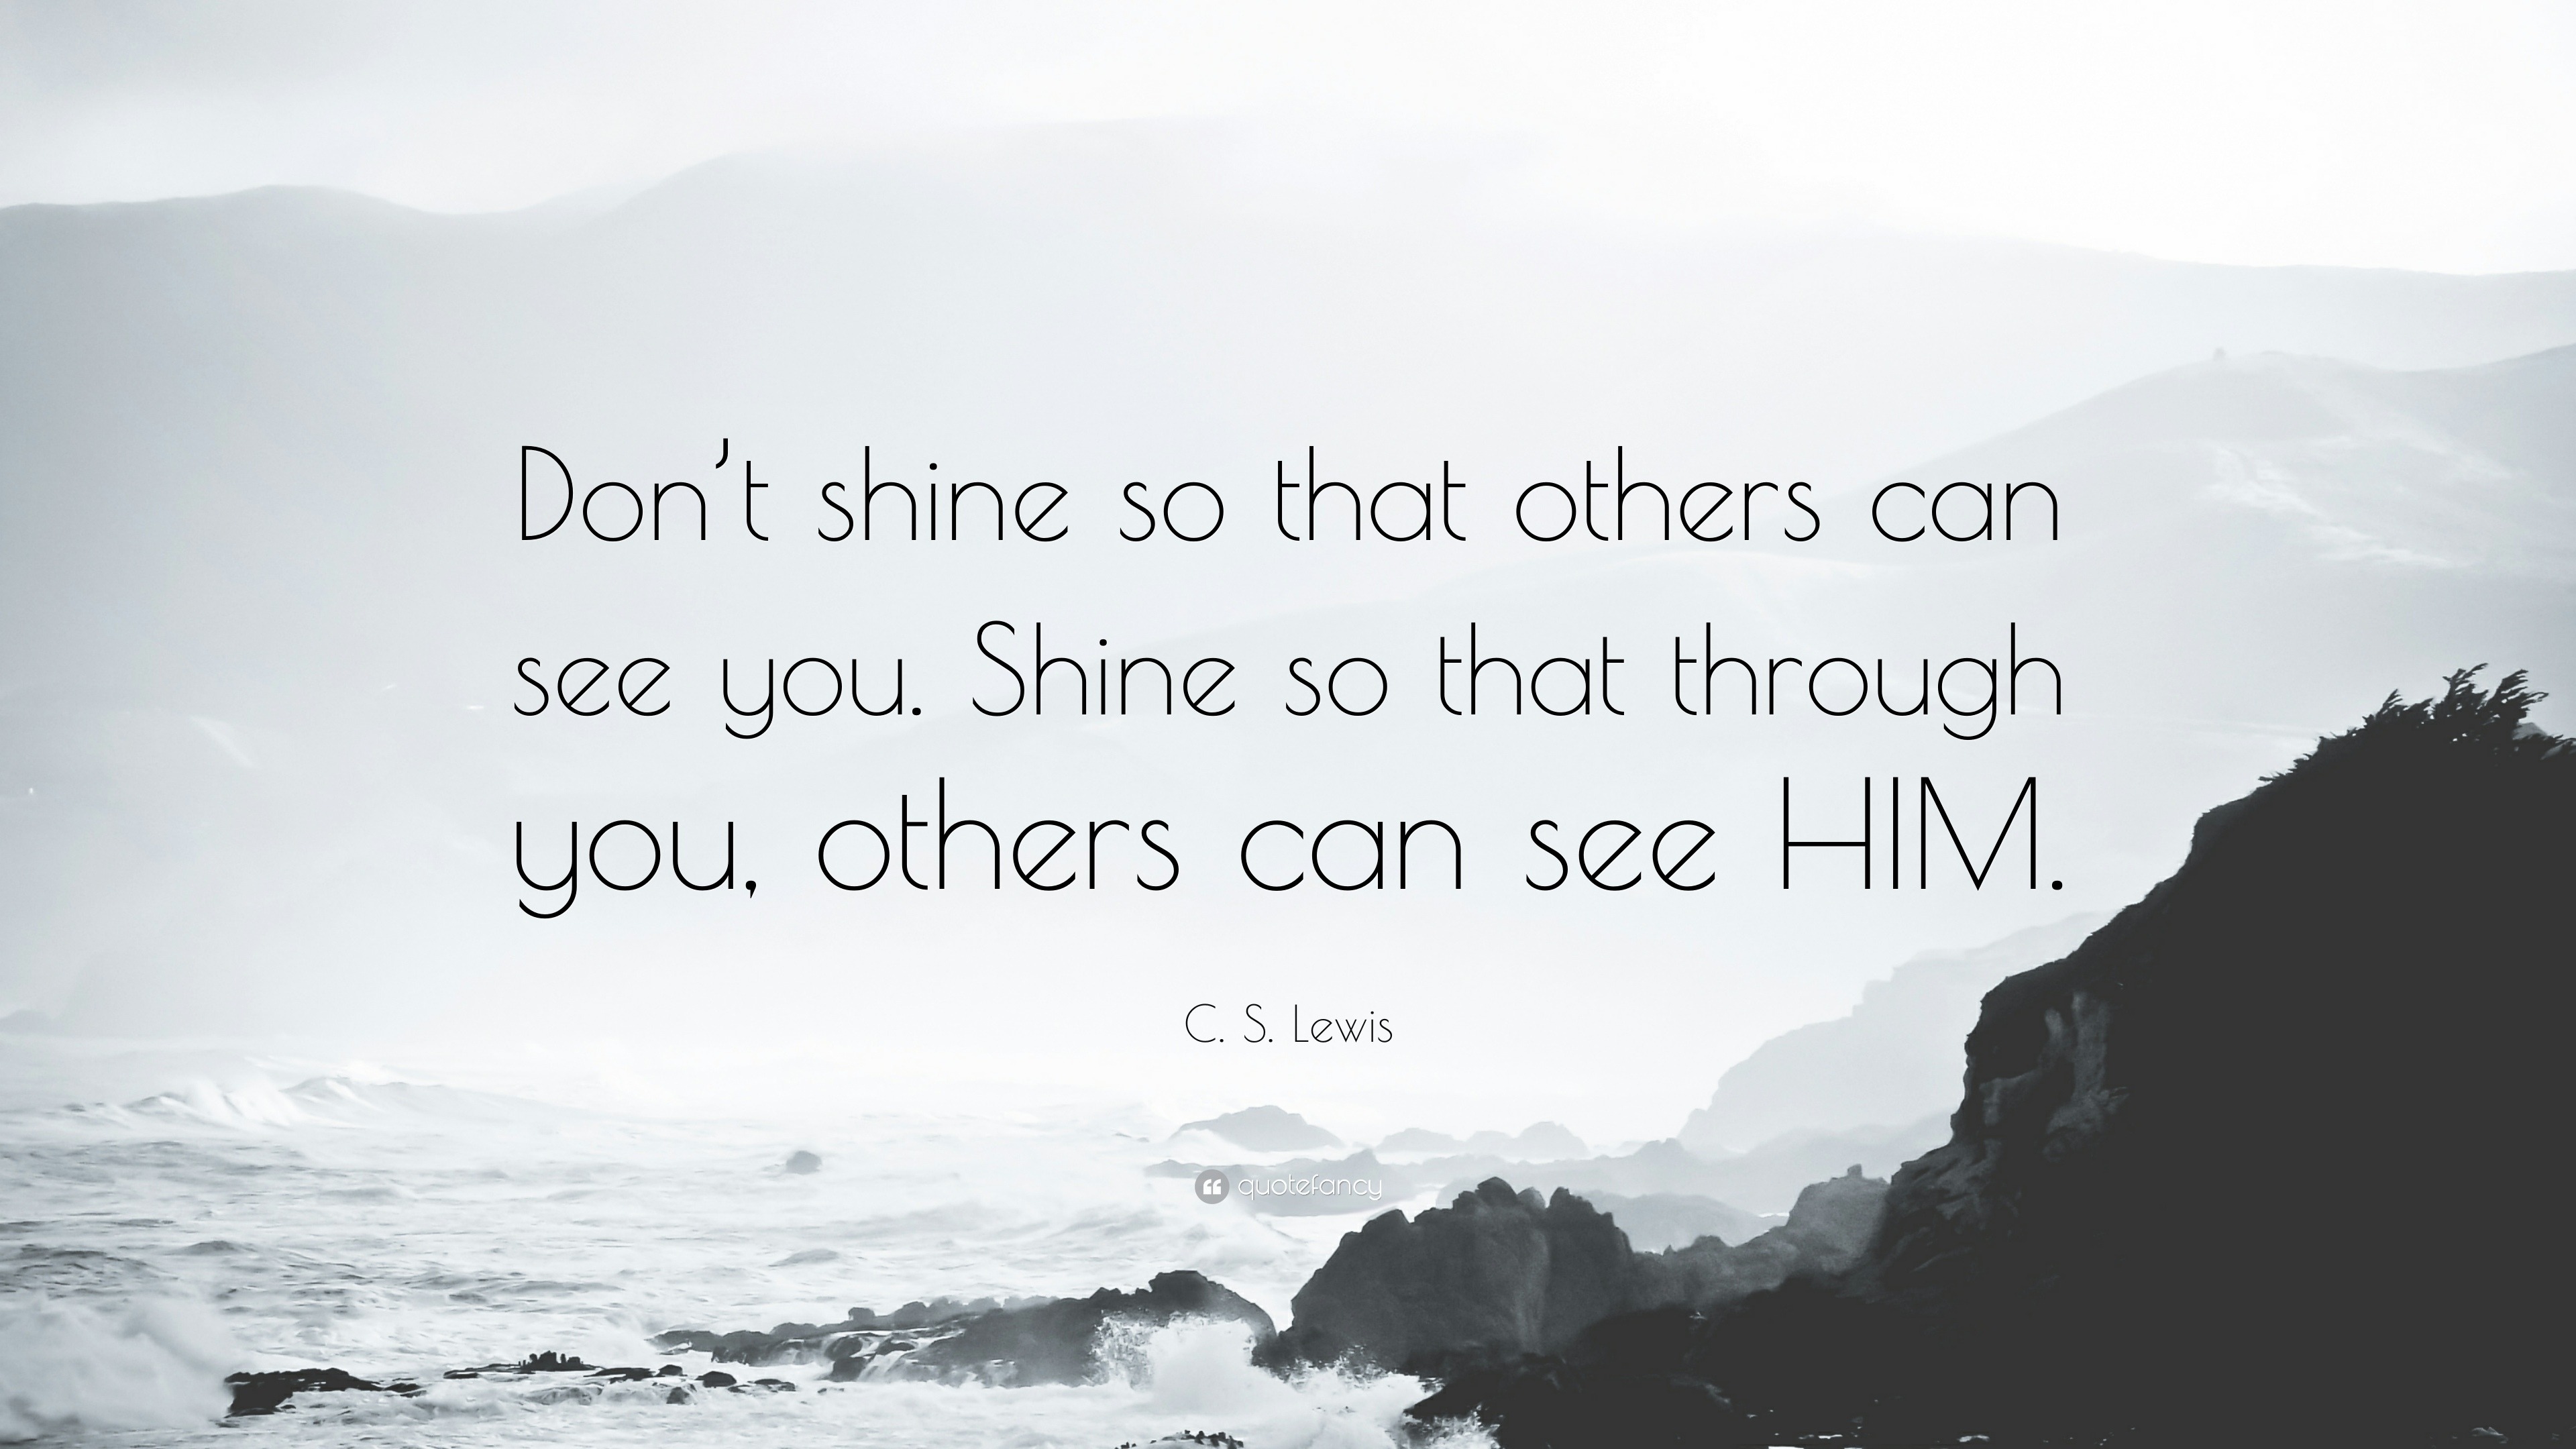 C S Lewis Quote Don T Shine So That Others Can See You Shine So That Through